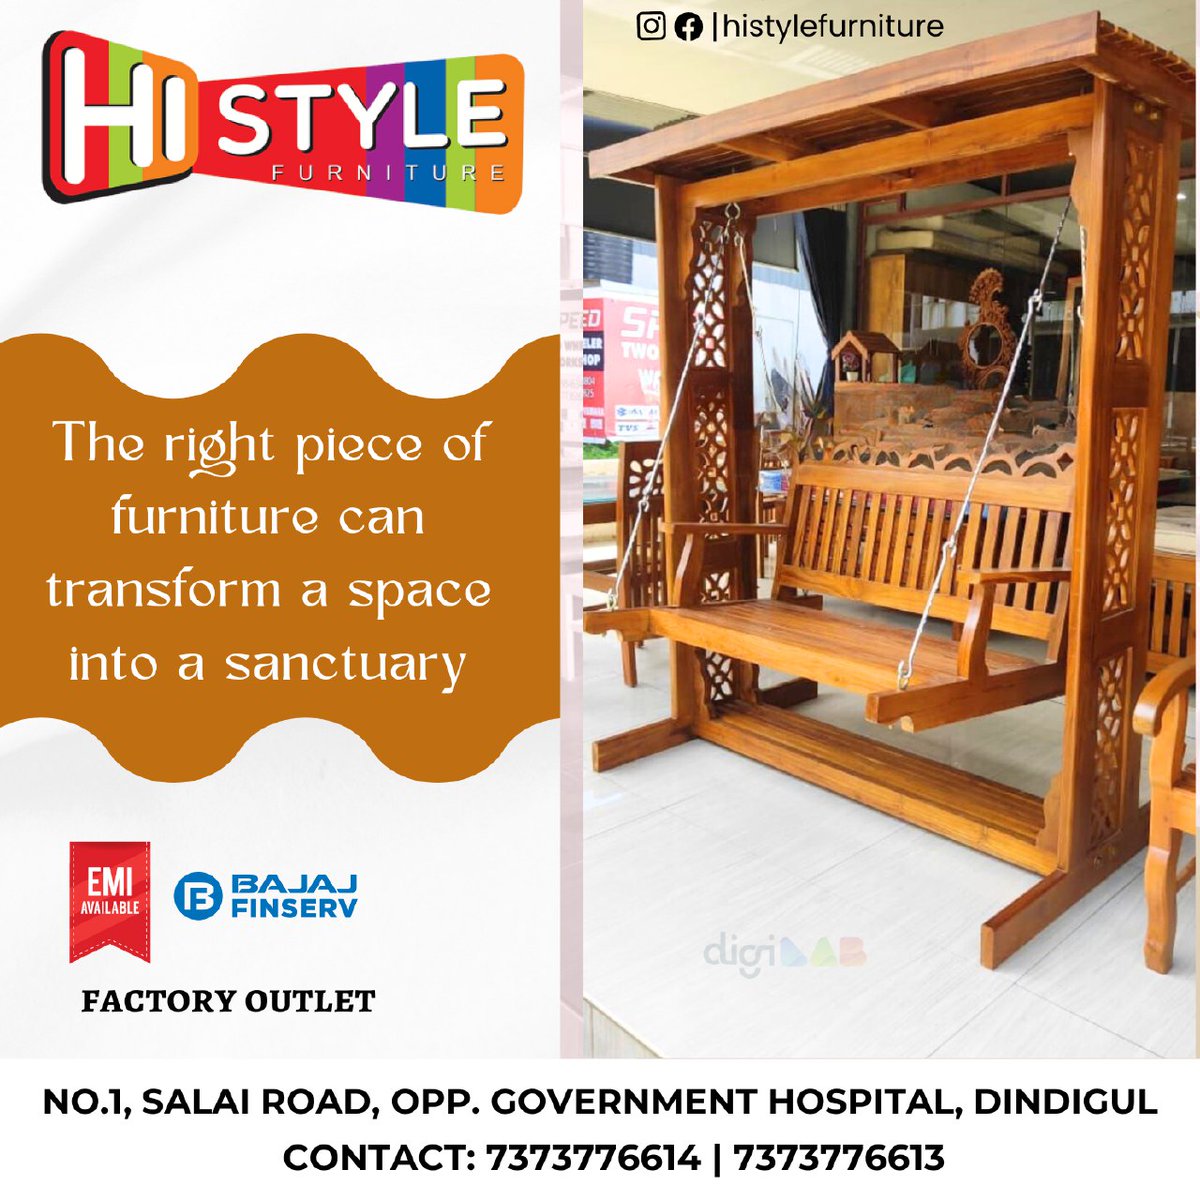 The right piece of furniture can transform a space into a sanctuary
@histylefurnitures 

For enquiries
+91 73737 76614
+91 73737 76613
#kingcot #chritmas #sofa #furnitures #histyle #interordesign  #bookself #teatable #2seatersofa  #3seatersofa #tvcabinet #diningtable  #swing